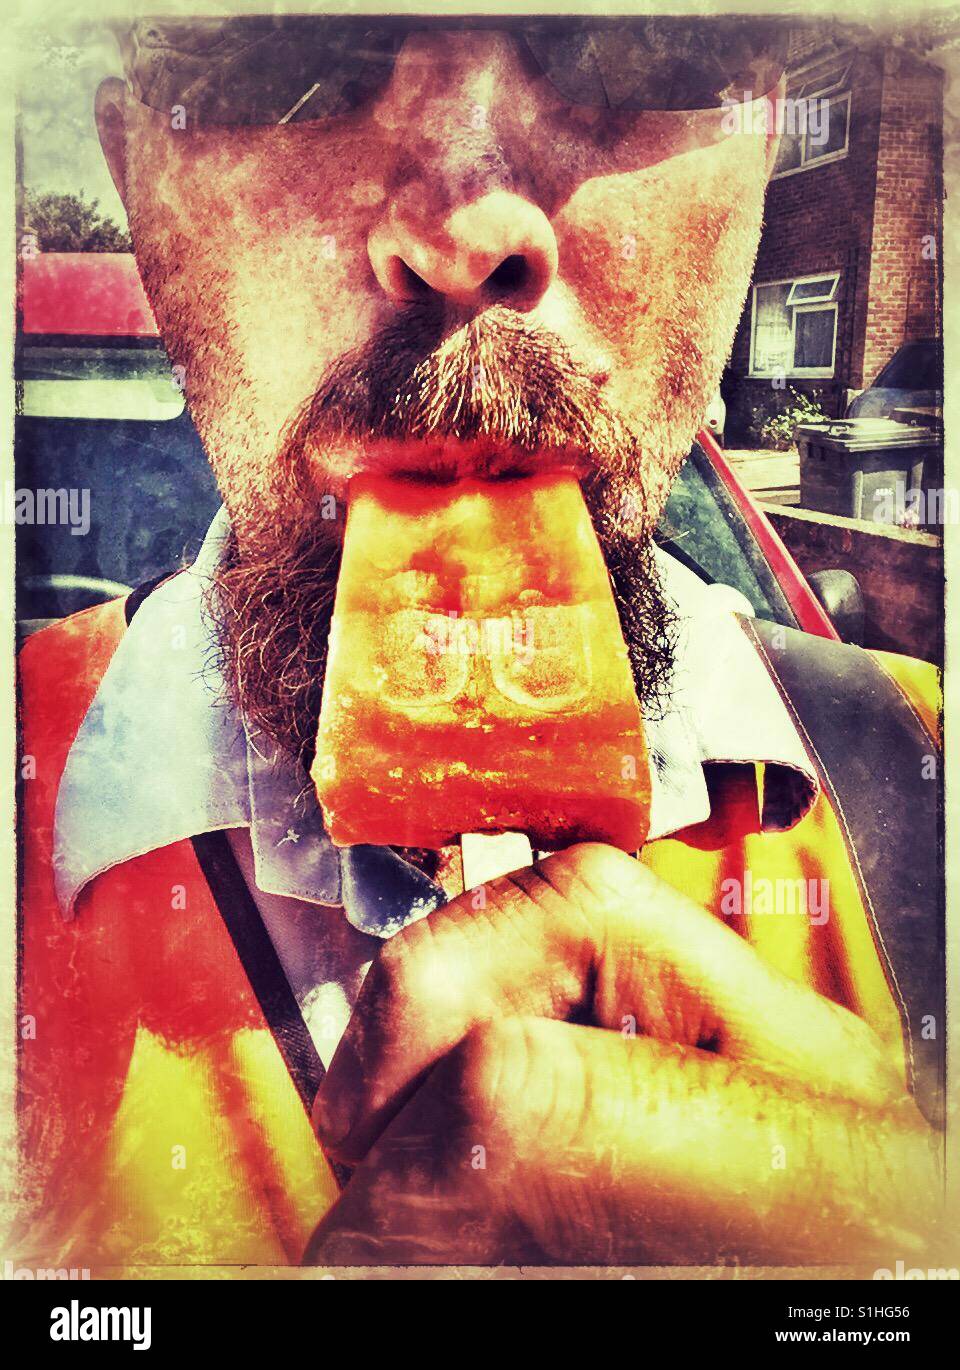 Postman with Ice Lolly Stock Photo